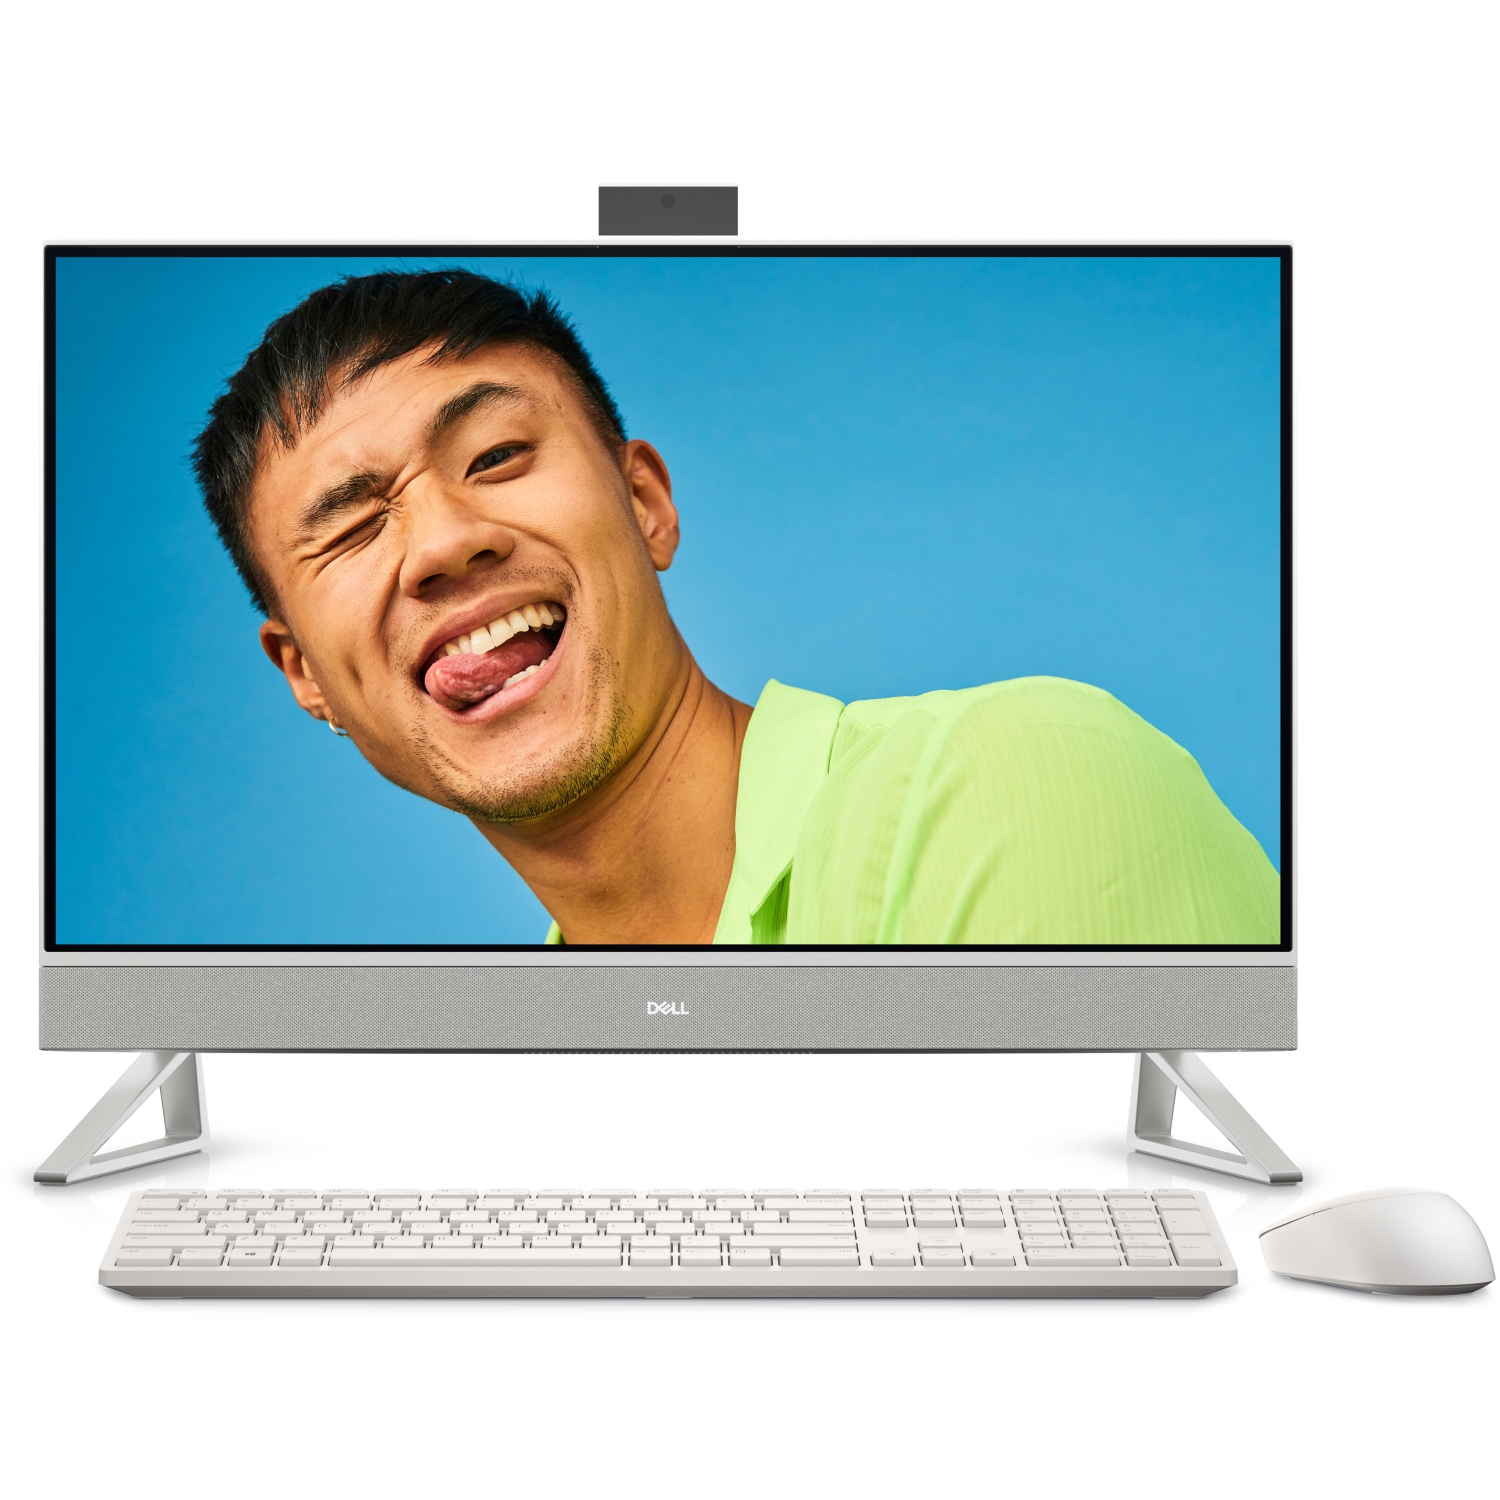 Refurbished (Excellent) – Dell Inspiron 7710 AIO (2022) | 27" FHD Touch | Core i7 - 1TB SSD + 1TB HDD - 24GB RAM - GeForce MX550 | 10 Cores @ 4.7 GHz - 12th Gen CPU